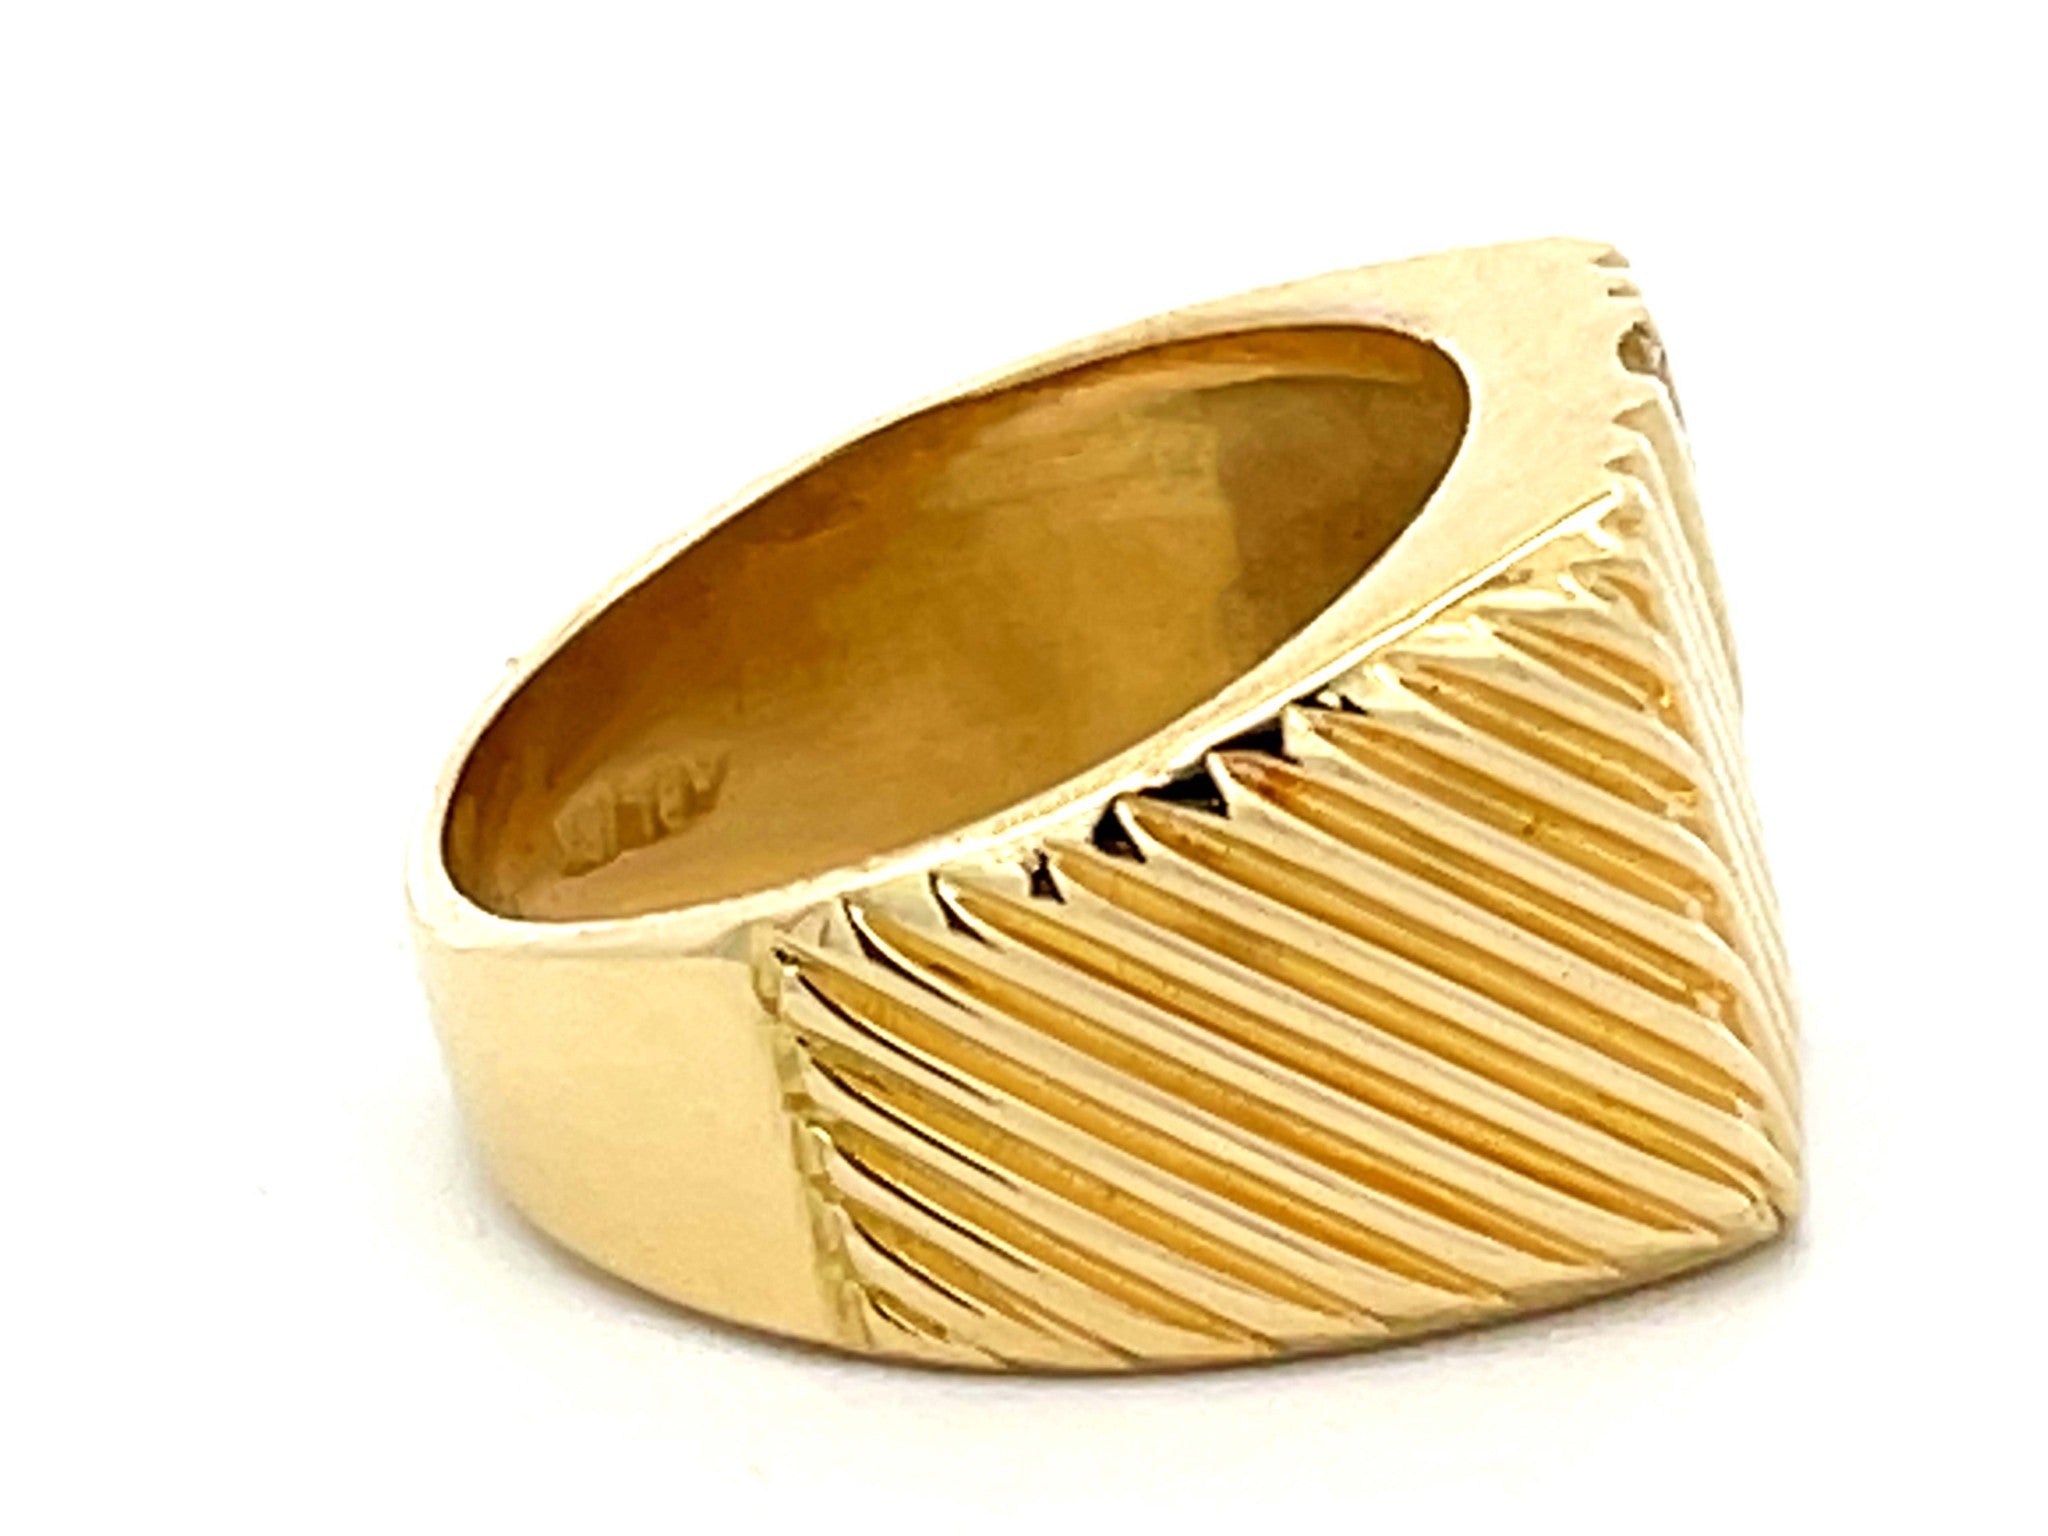 Mens Fluted Design and Diagonal Diamond Row Pinky Ring in 18k Yellow Gold